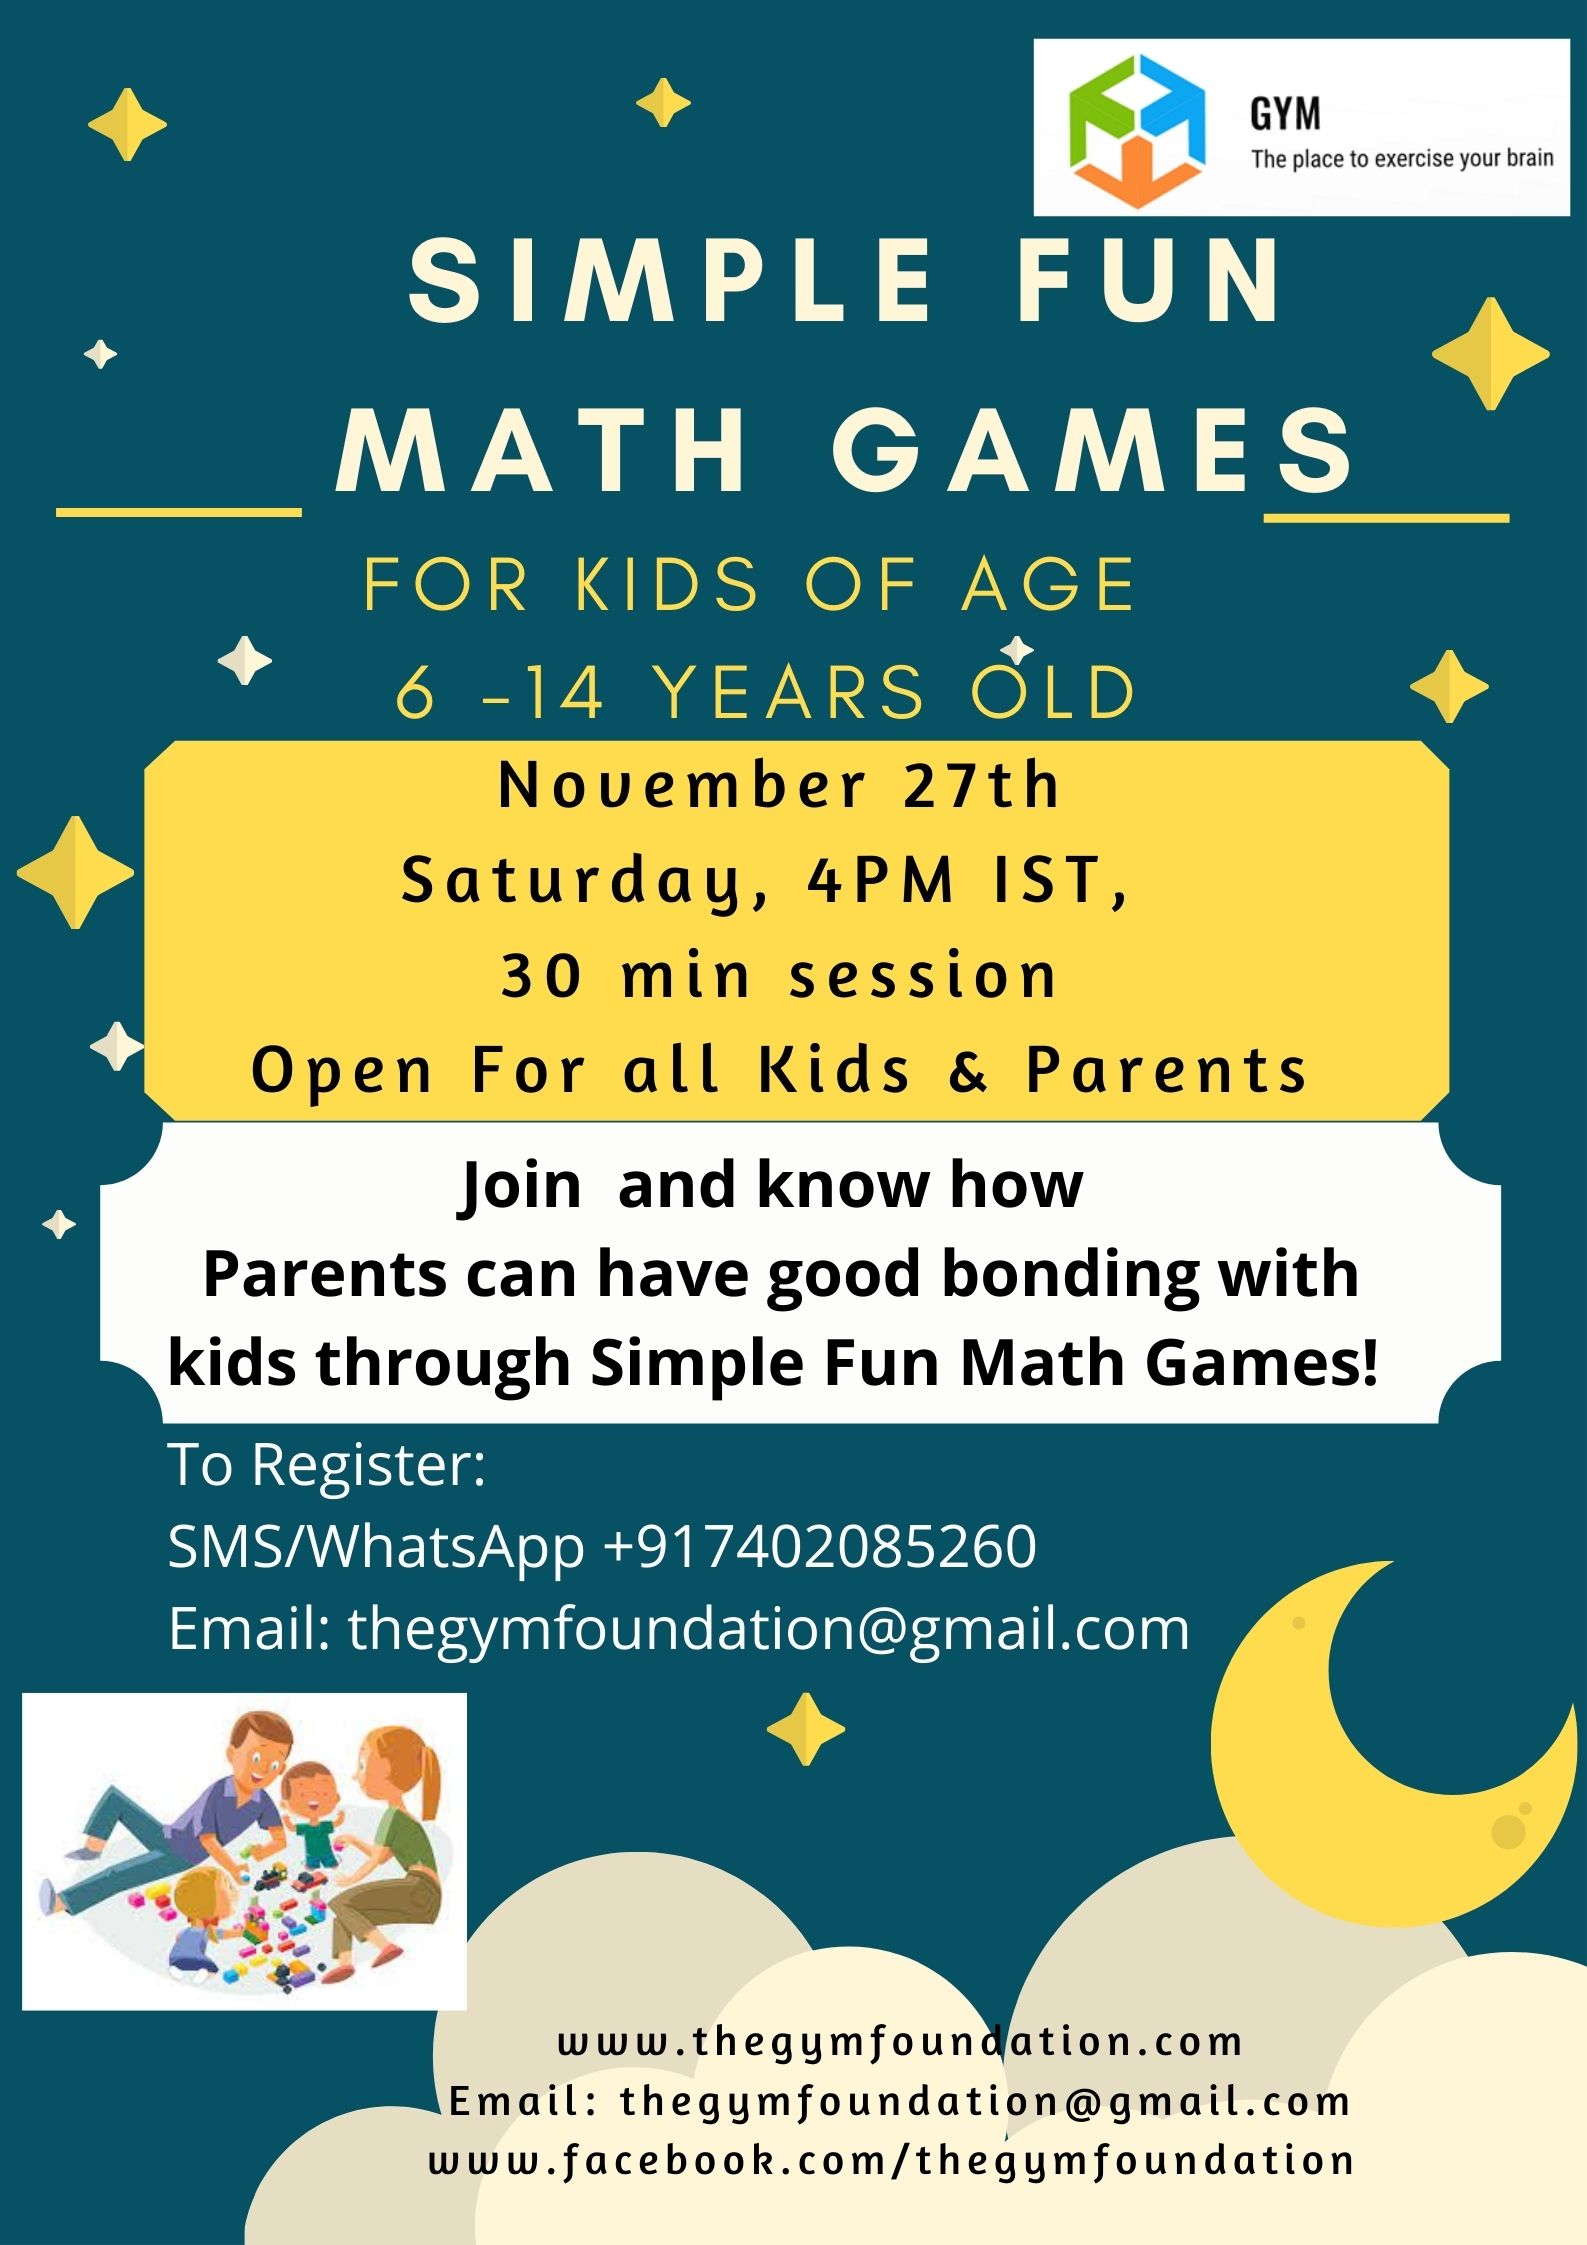 math-at-home-simple-fun-math-games-gym-growing-young-mathematicians